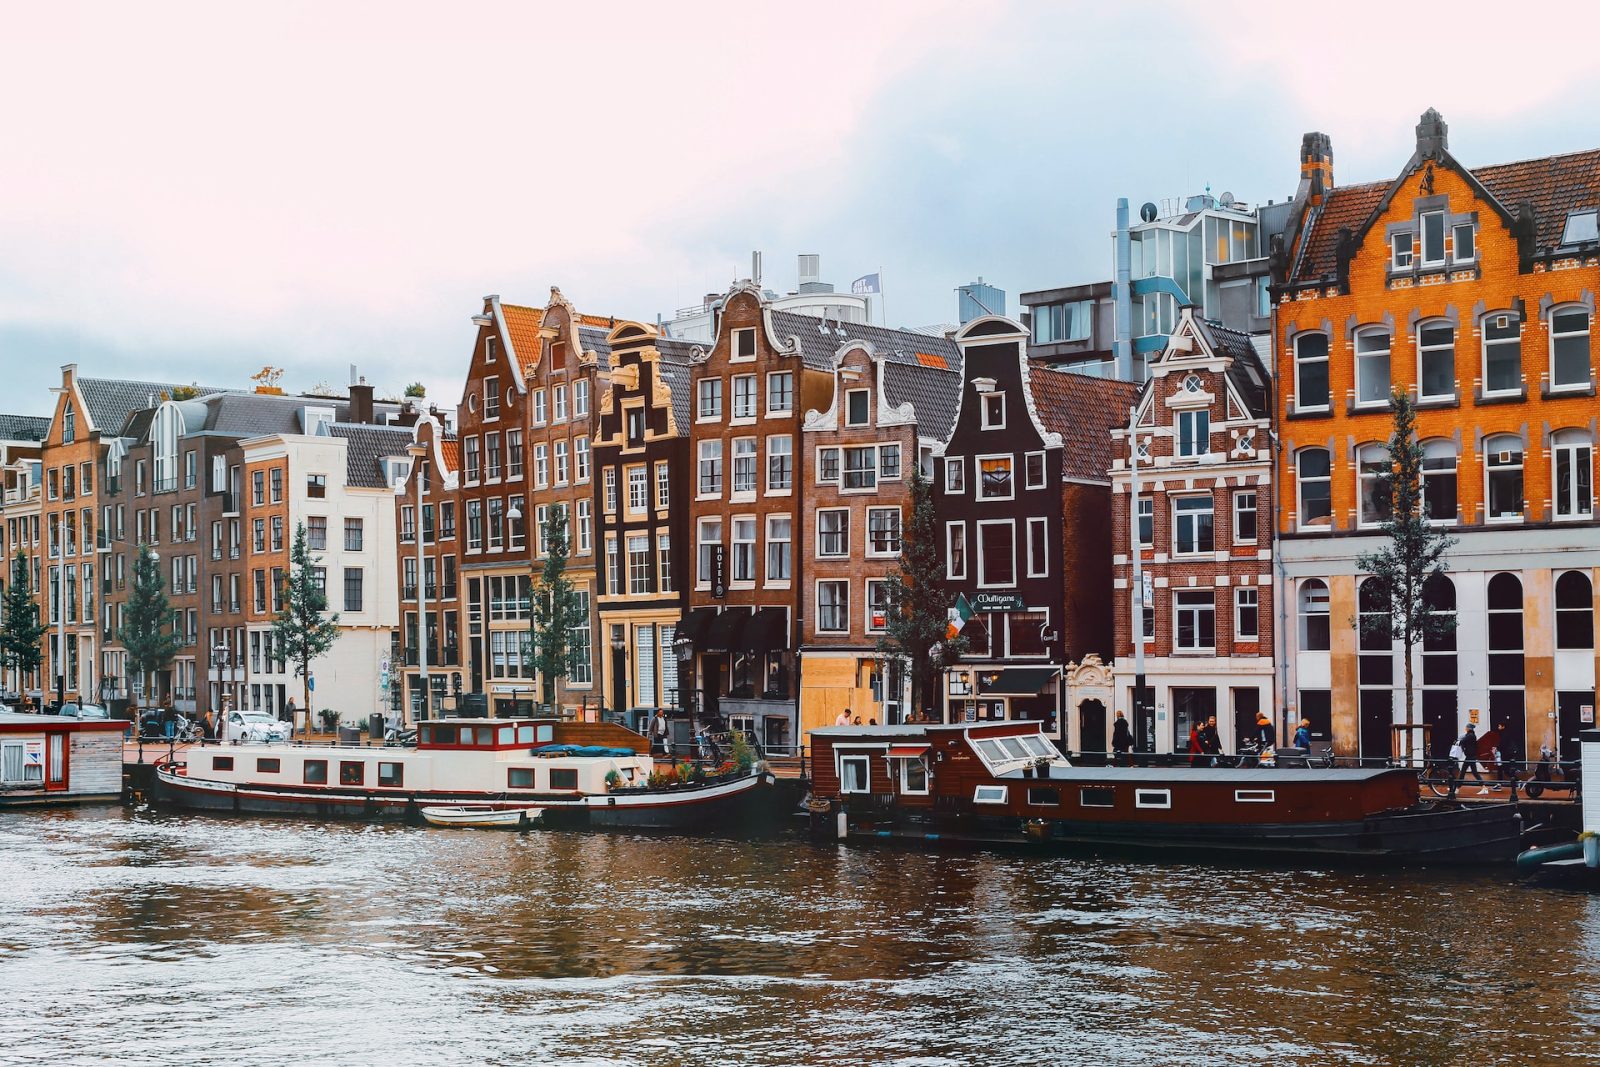 JetBlue Launches Amsterdam Service with Flights from New York